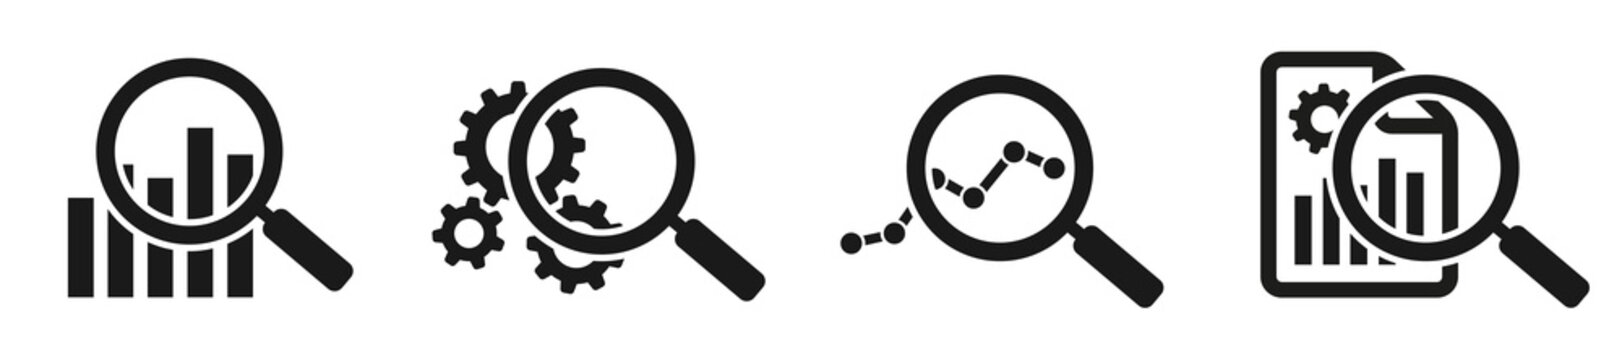 Set of magnifying glass data analysis icons. Market research, analytic. Business analysis, financial forecast logo. Vector illustration.